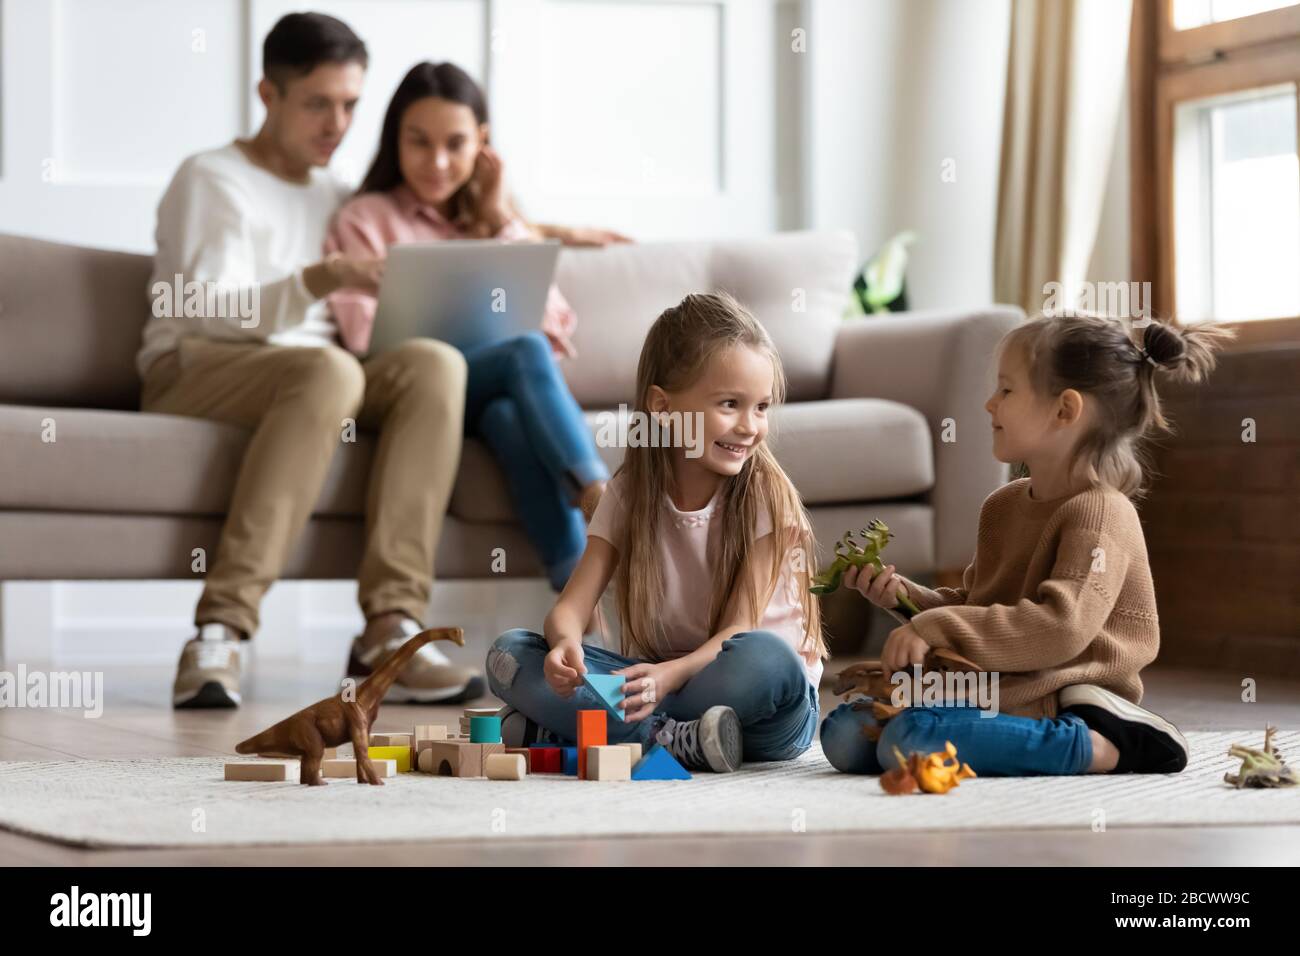 Happy family of four spending leisure time in living room. Stock Photo